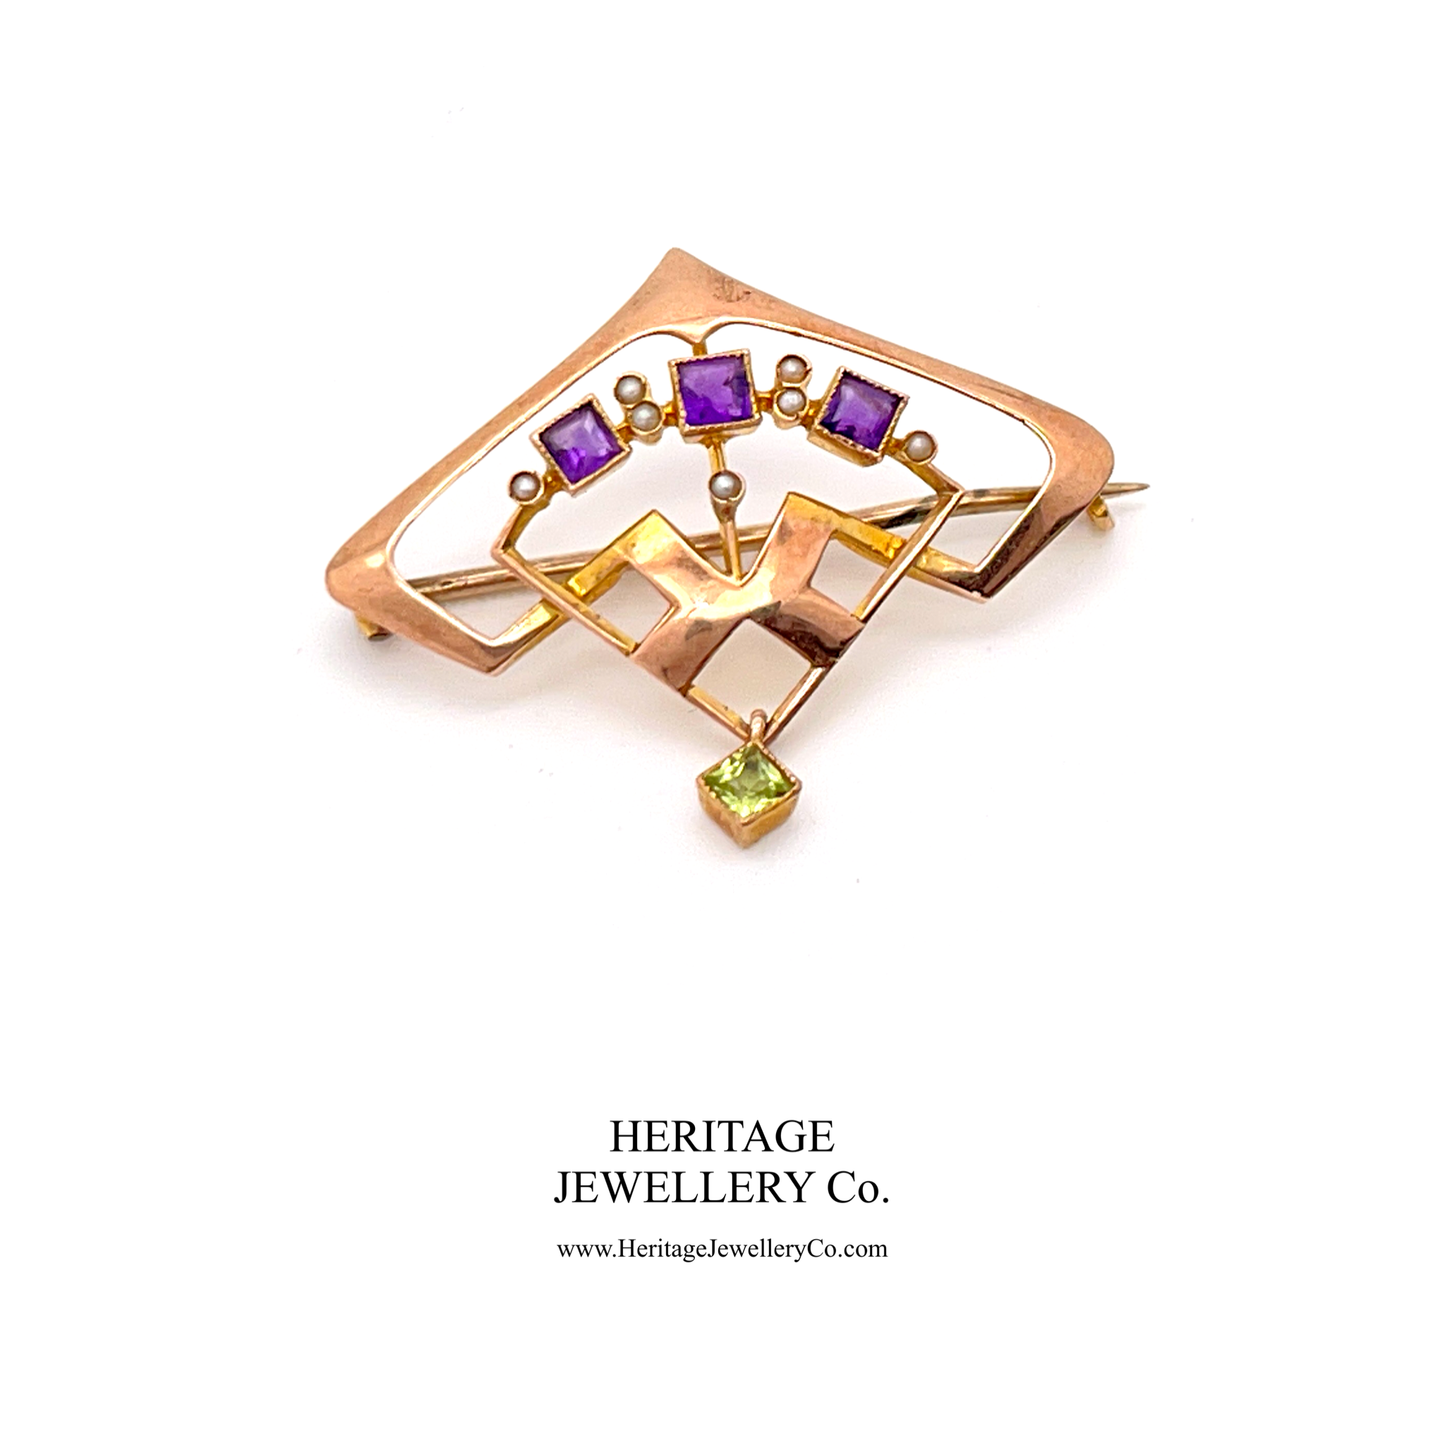 Antique Suffragette Brooch with Amethyst, Pearl and Peridot